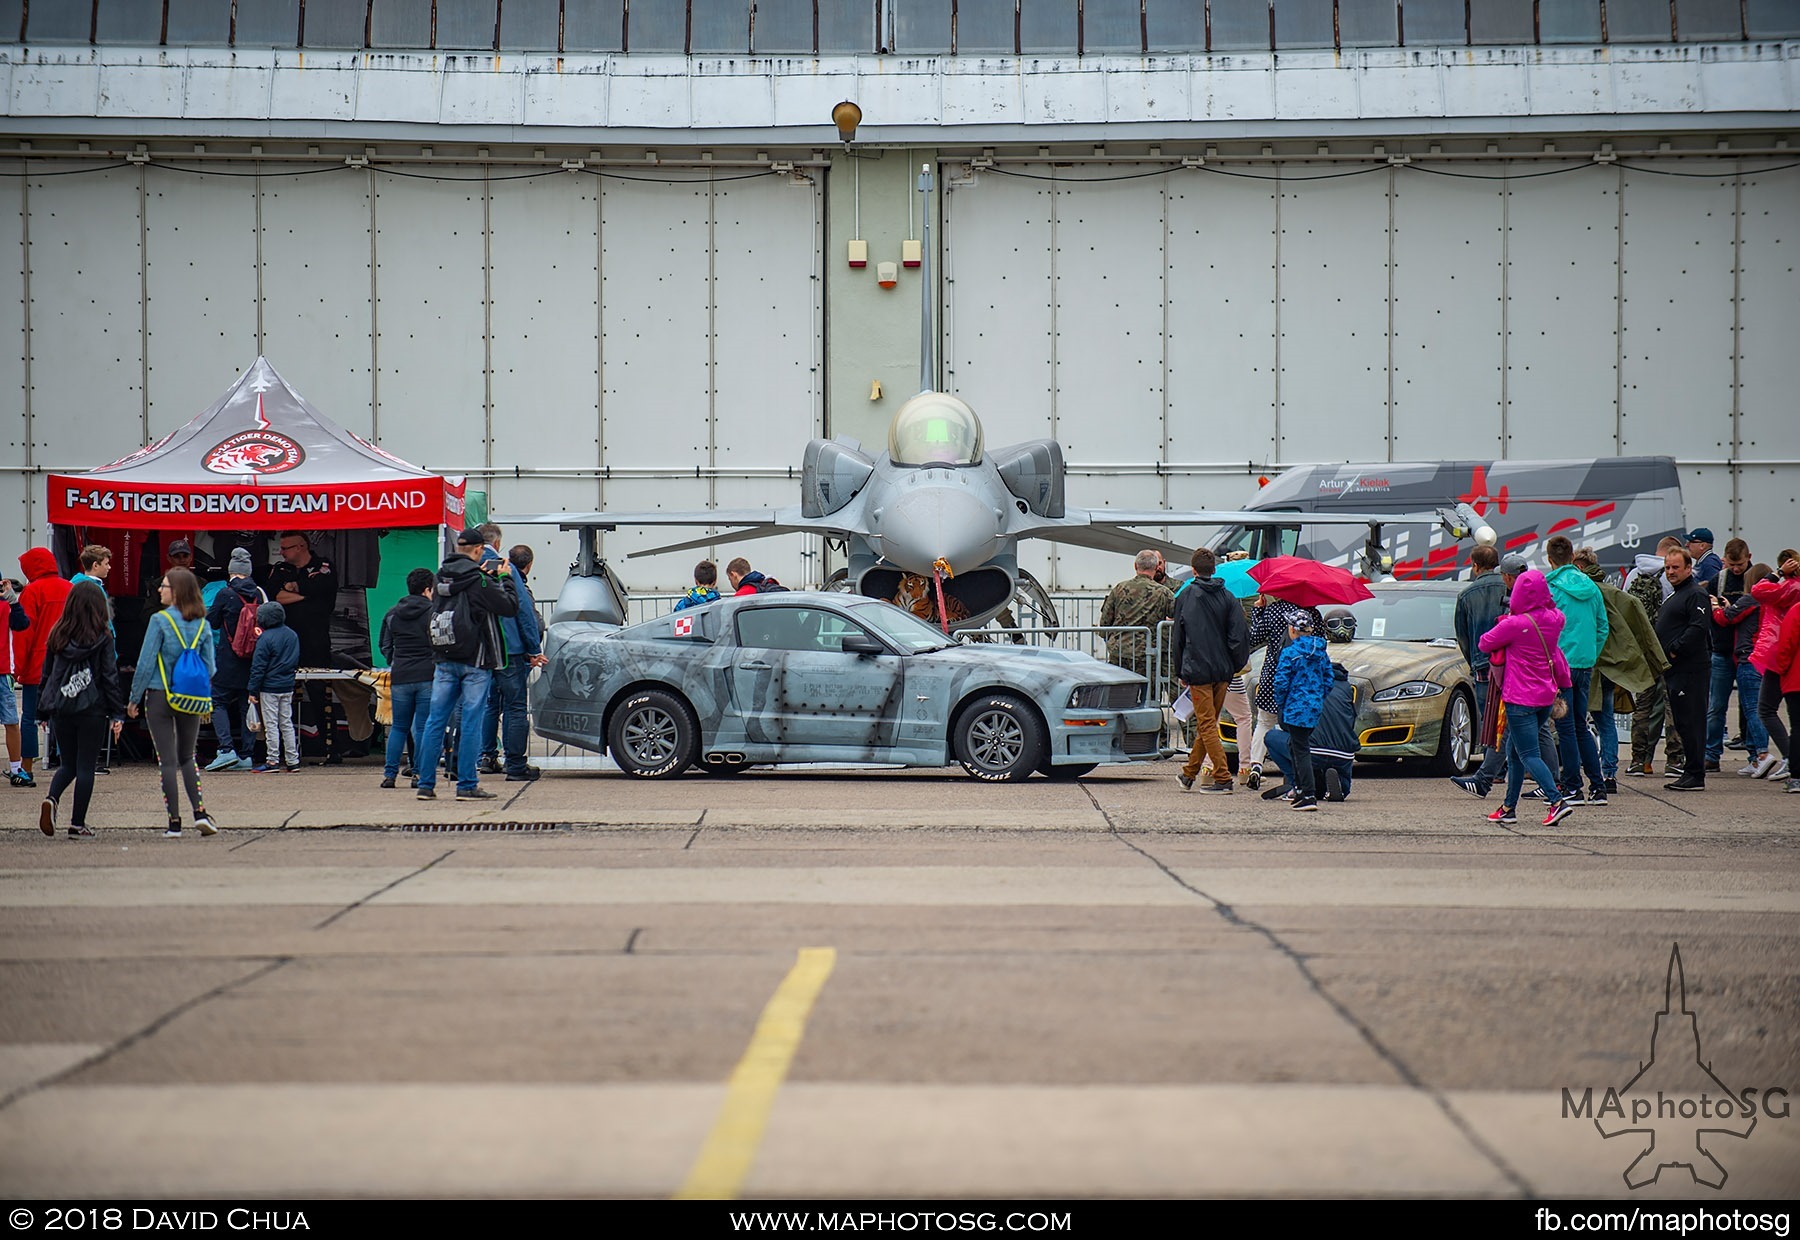 04. Static display area and fanzone of the Polish Air Force F-16 Tiger Demo Team